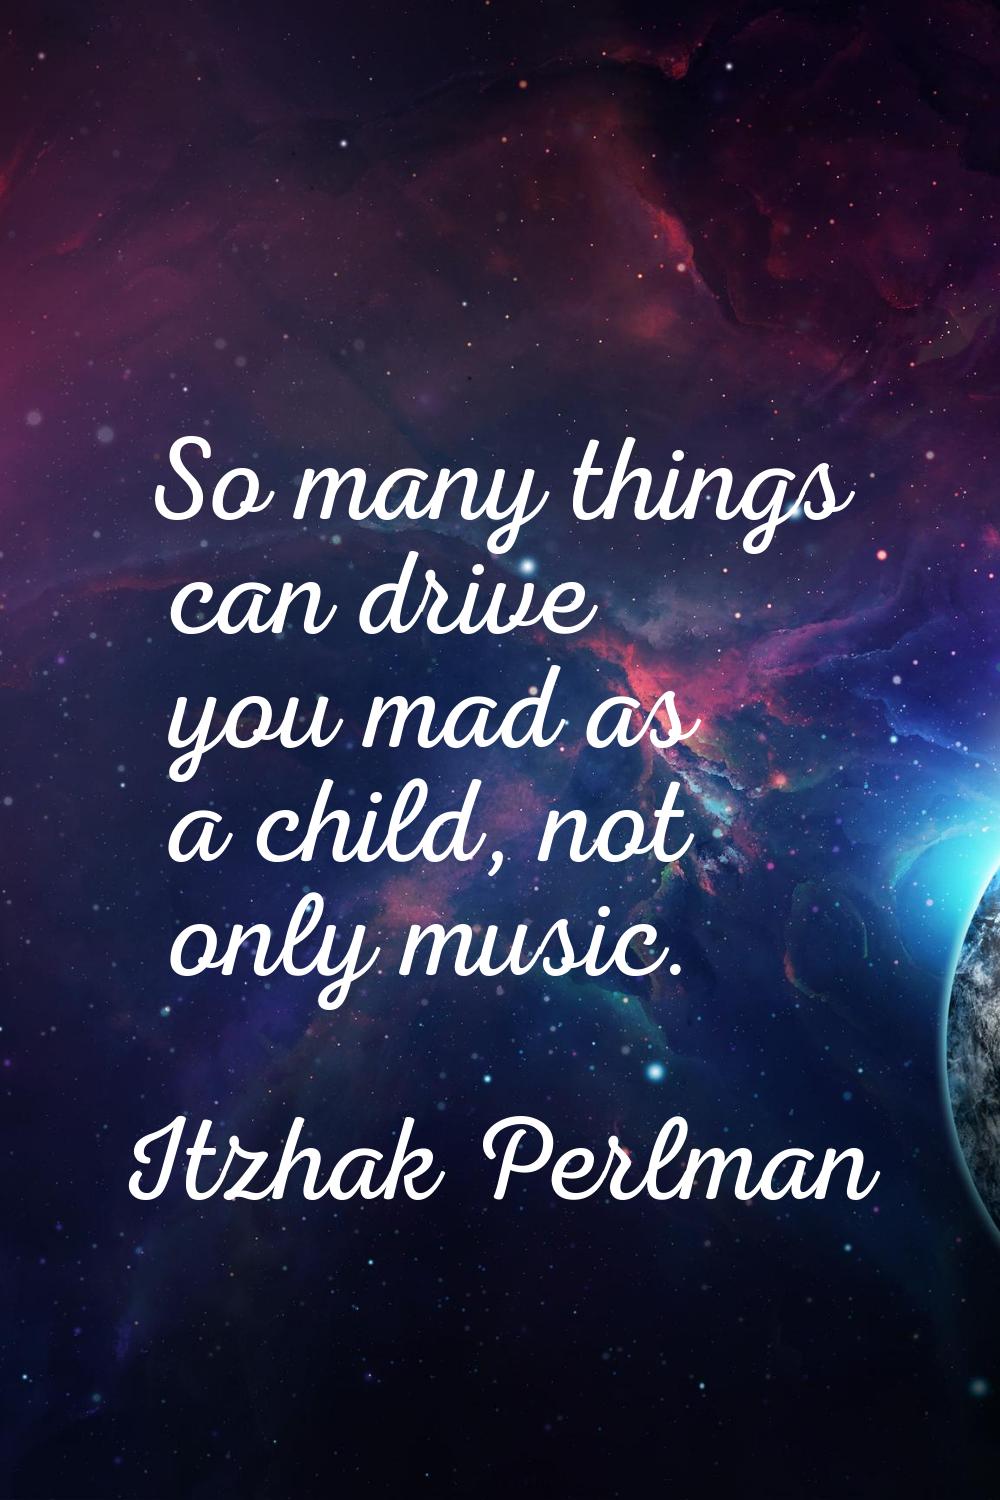 So many things can drive you mad as a child, not only music.